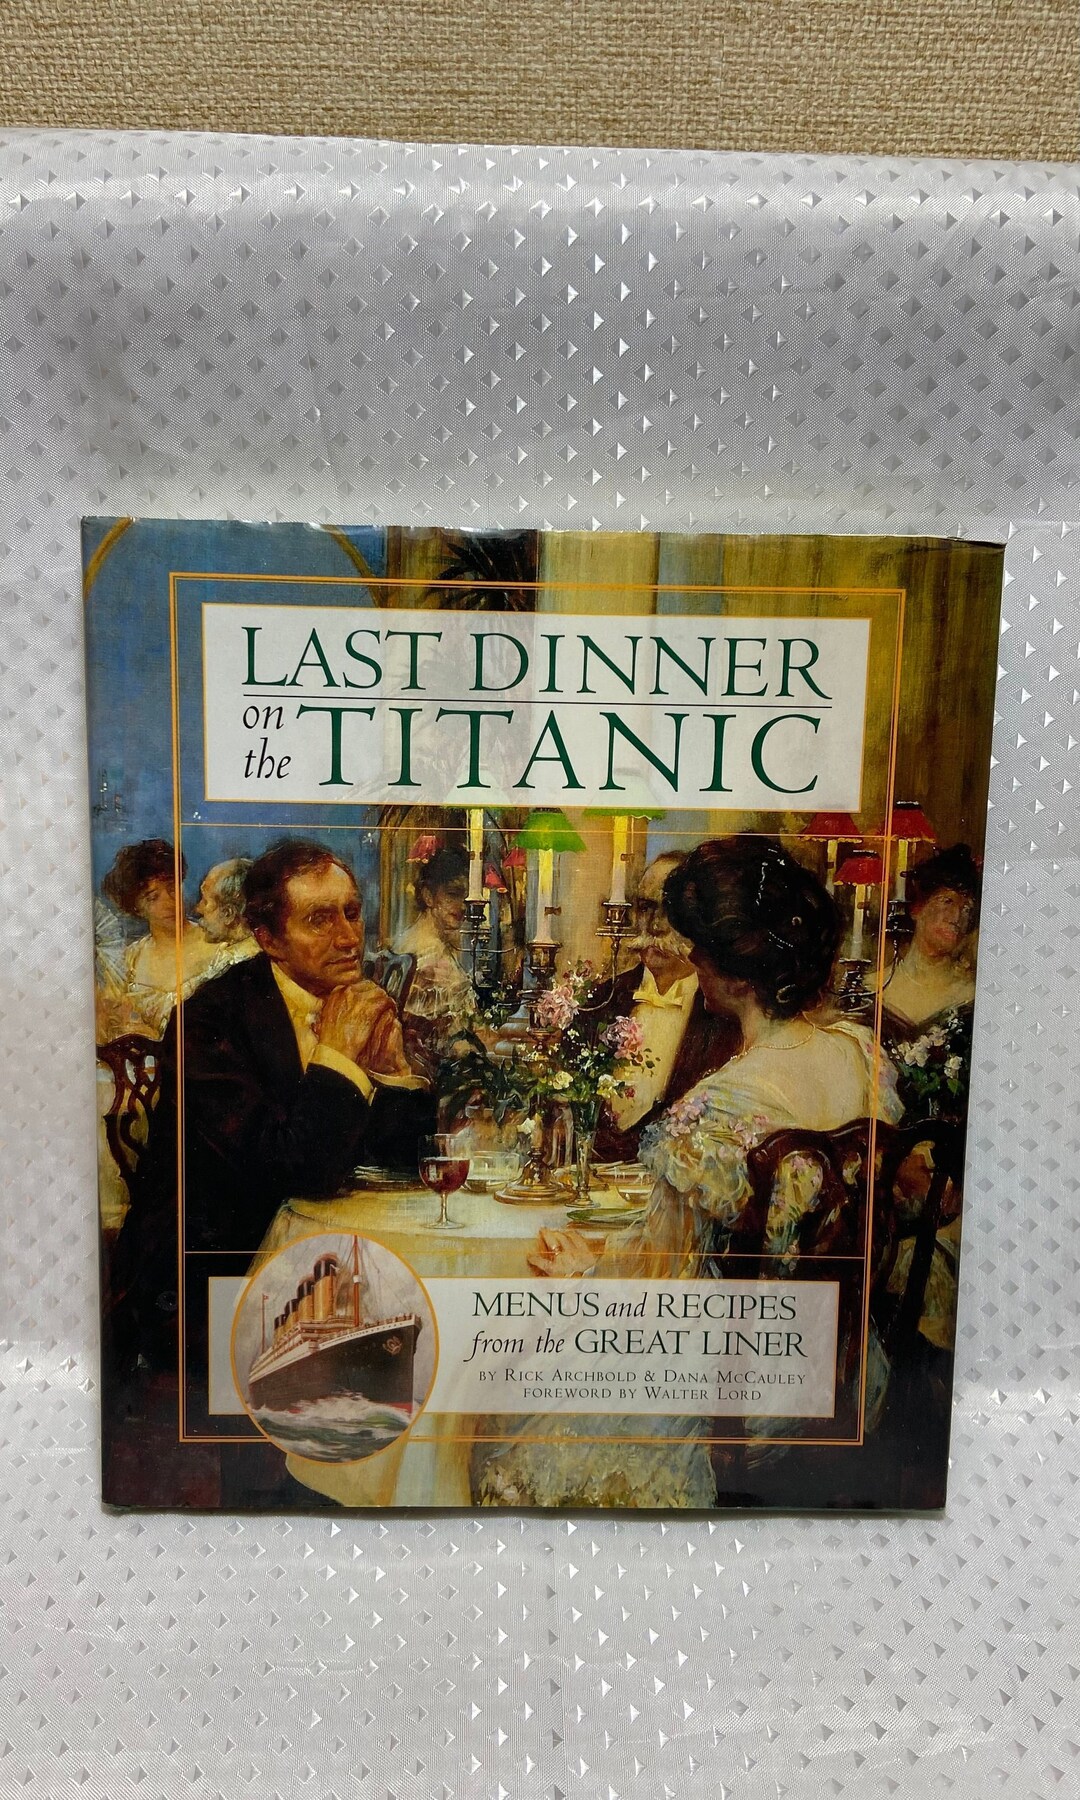 on　the　Edition　Dinner　First　Etsy　Last　Kong　Titanic　Hong